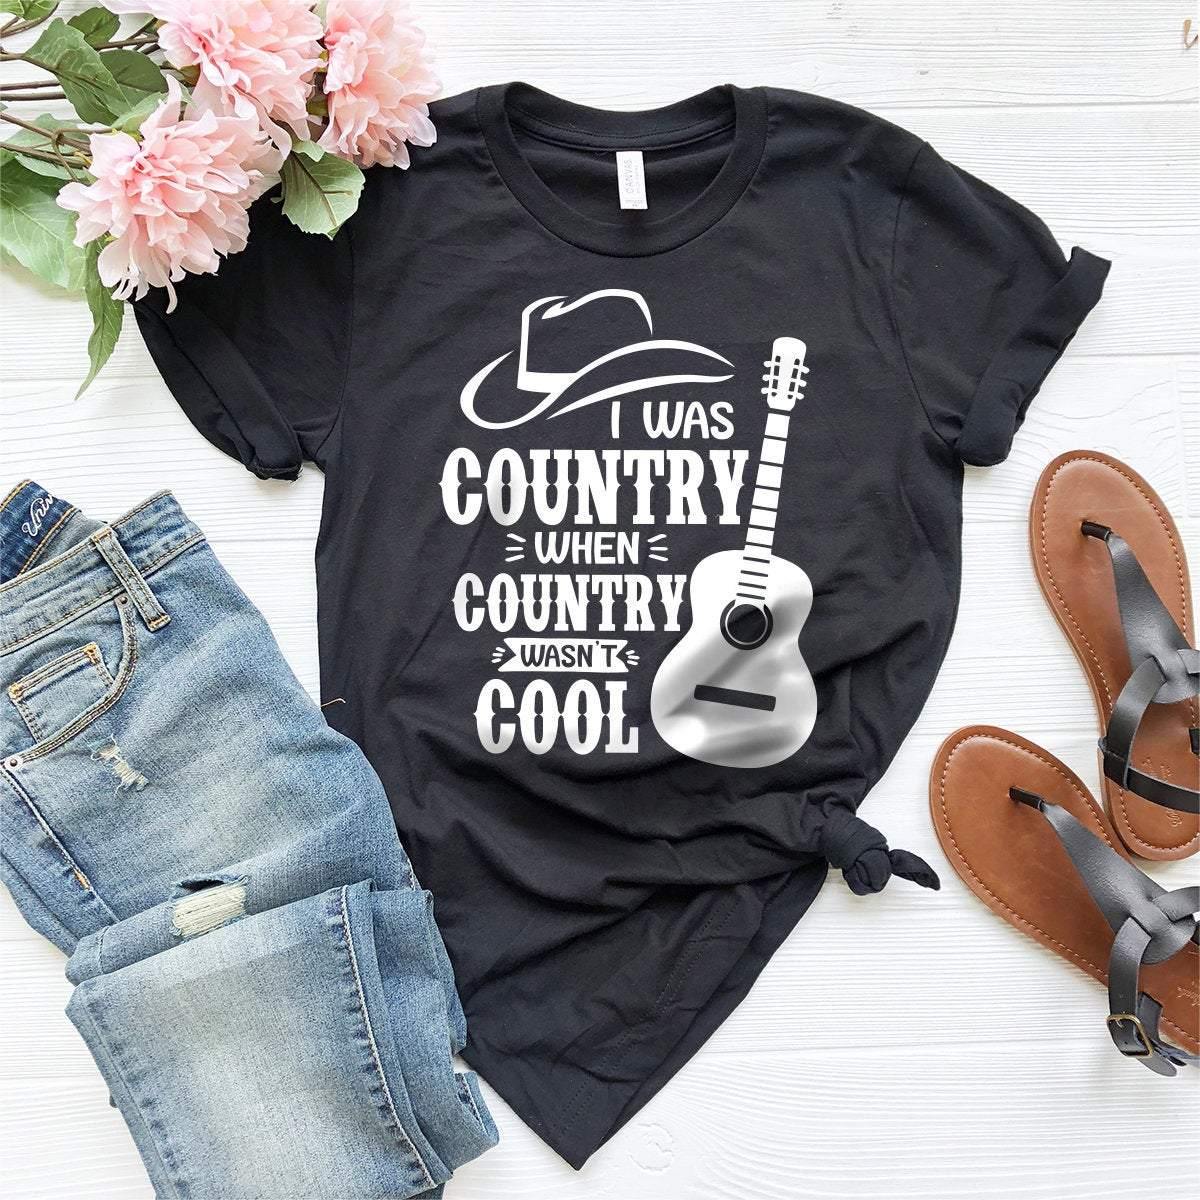 Country Lover Shirt, Country Music Shirt, I Was Country When Country Wasn't Cool , Country Girl Shirt, Cowgirl T-Shirt, Barbara Mandrell Tee - Fastdeliverytees.com